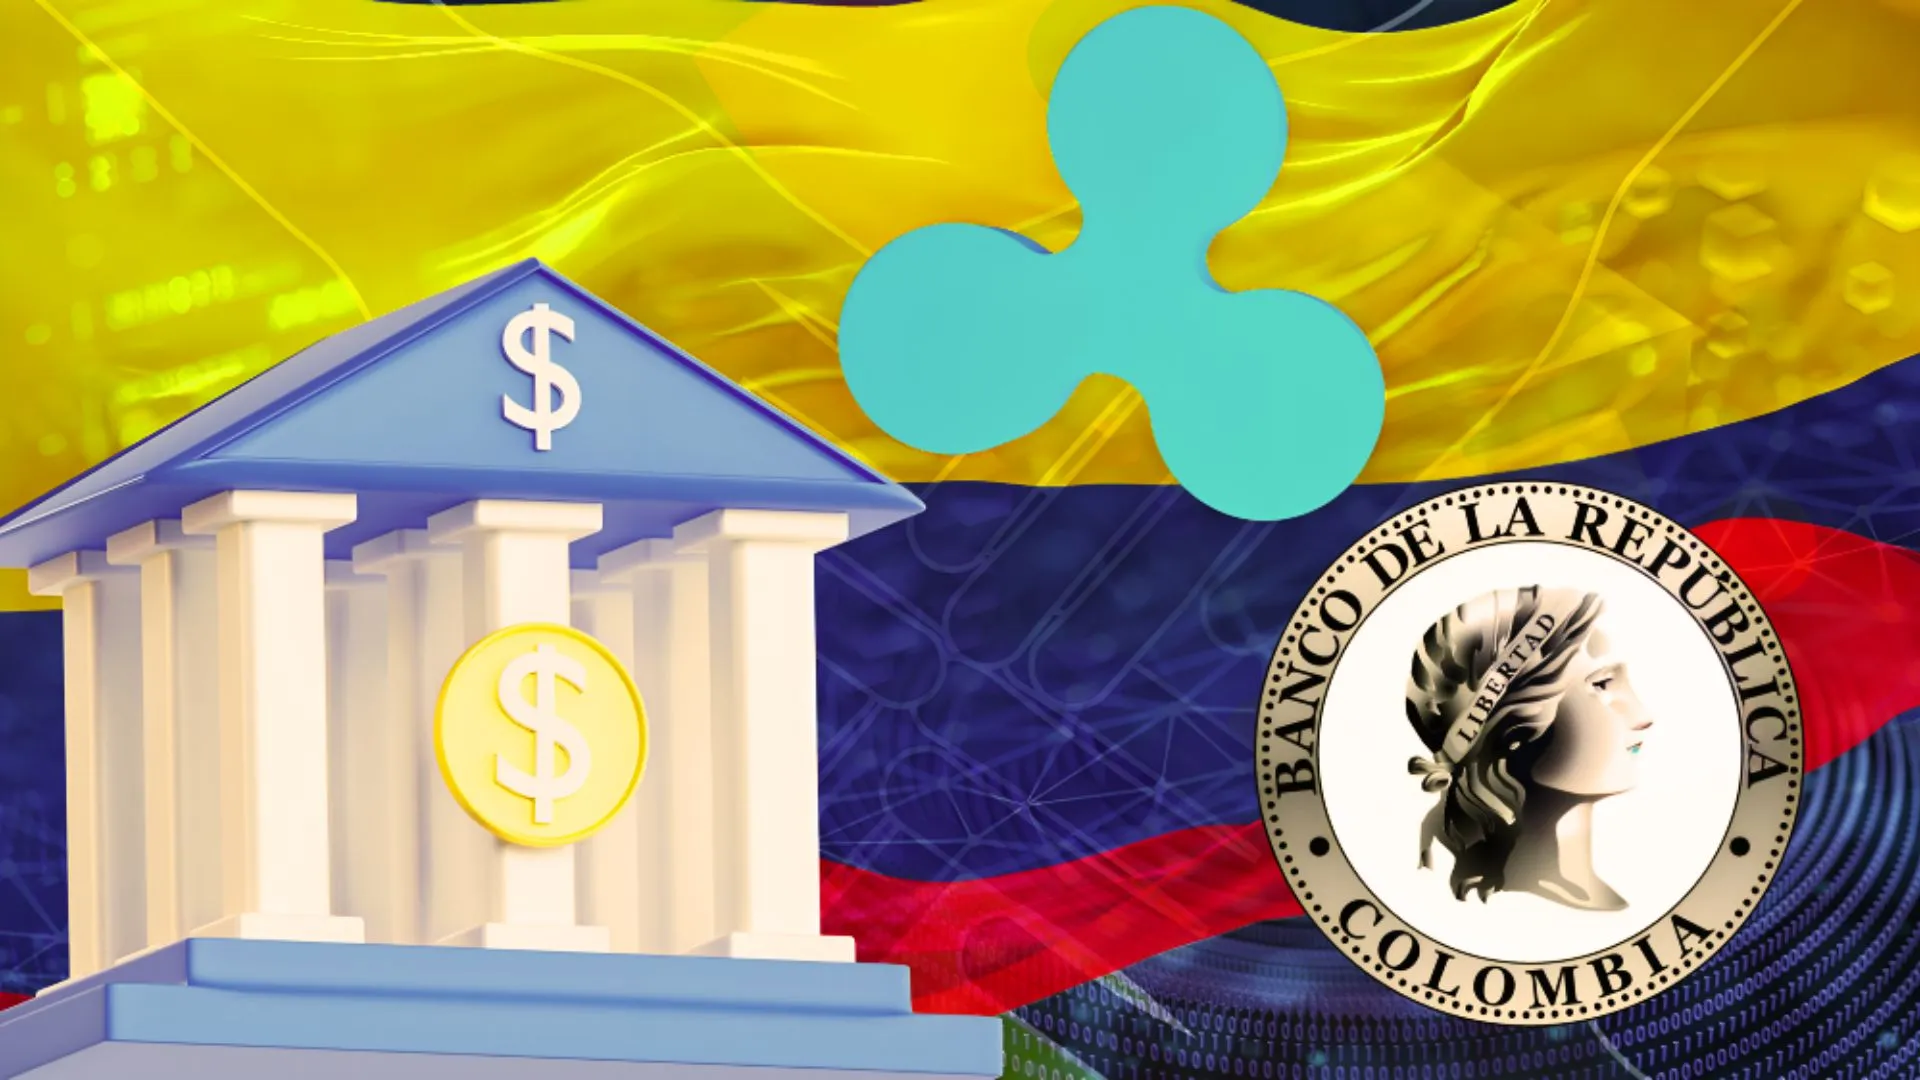 Colombia’s Central Bank and Ripple Collaborate to Study Blockchain Technology